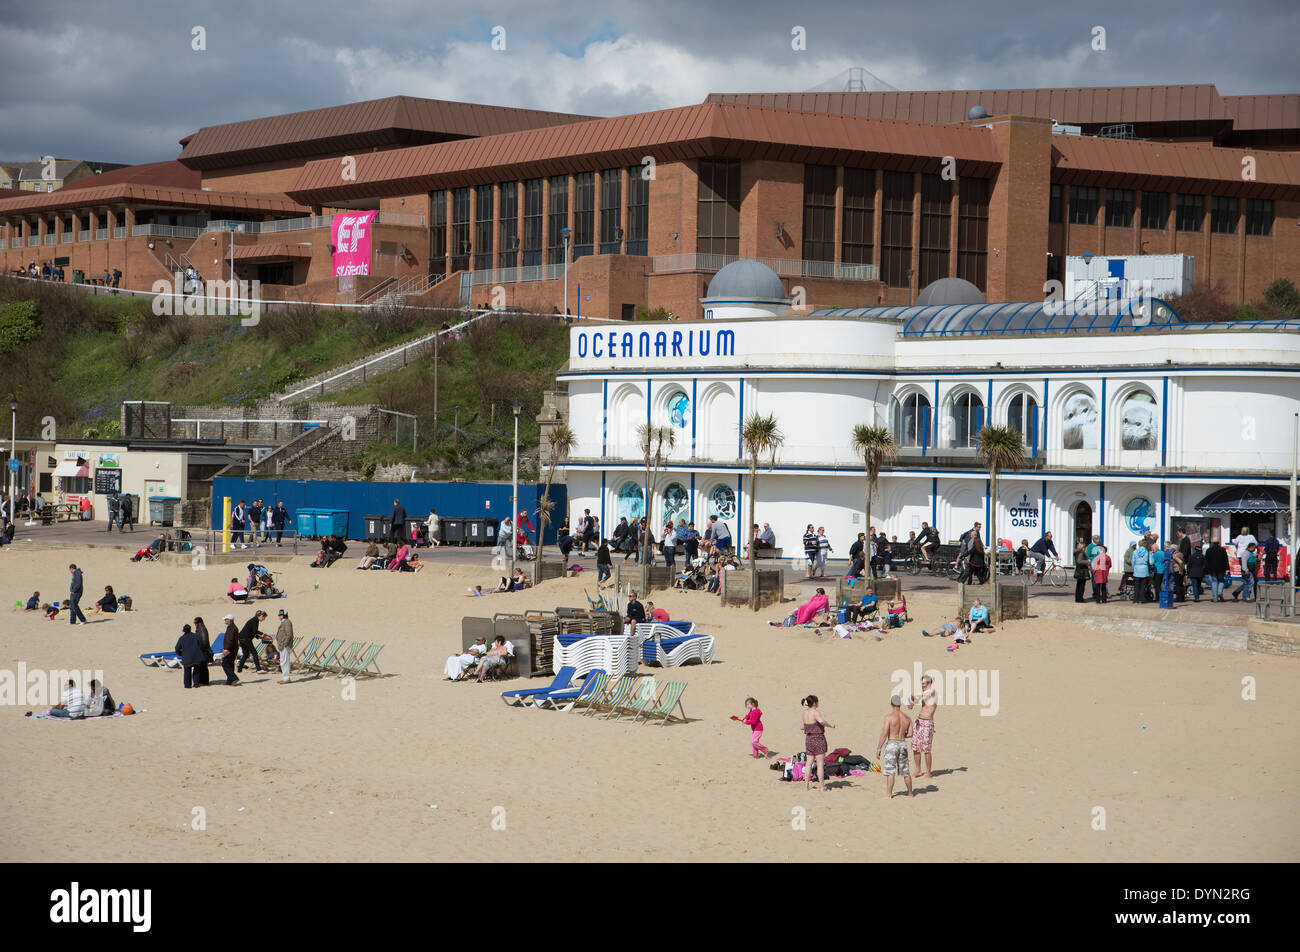 Bournemouth seafront looking west Popular English resort The BIC complex and Oceanarium building overlooking the beach Stock Photo